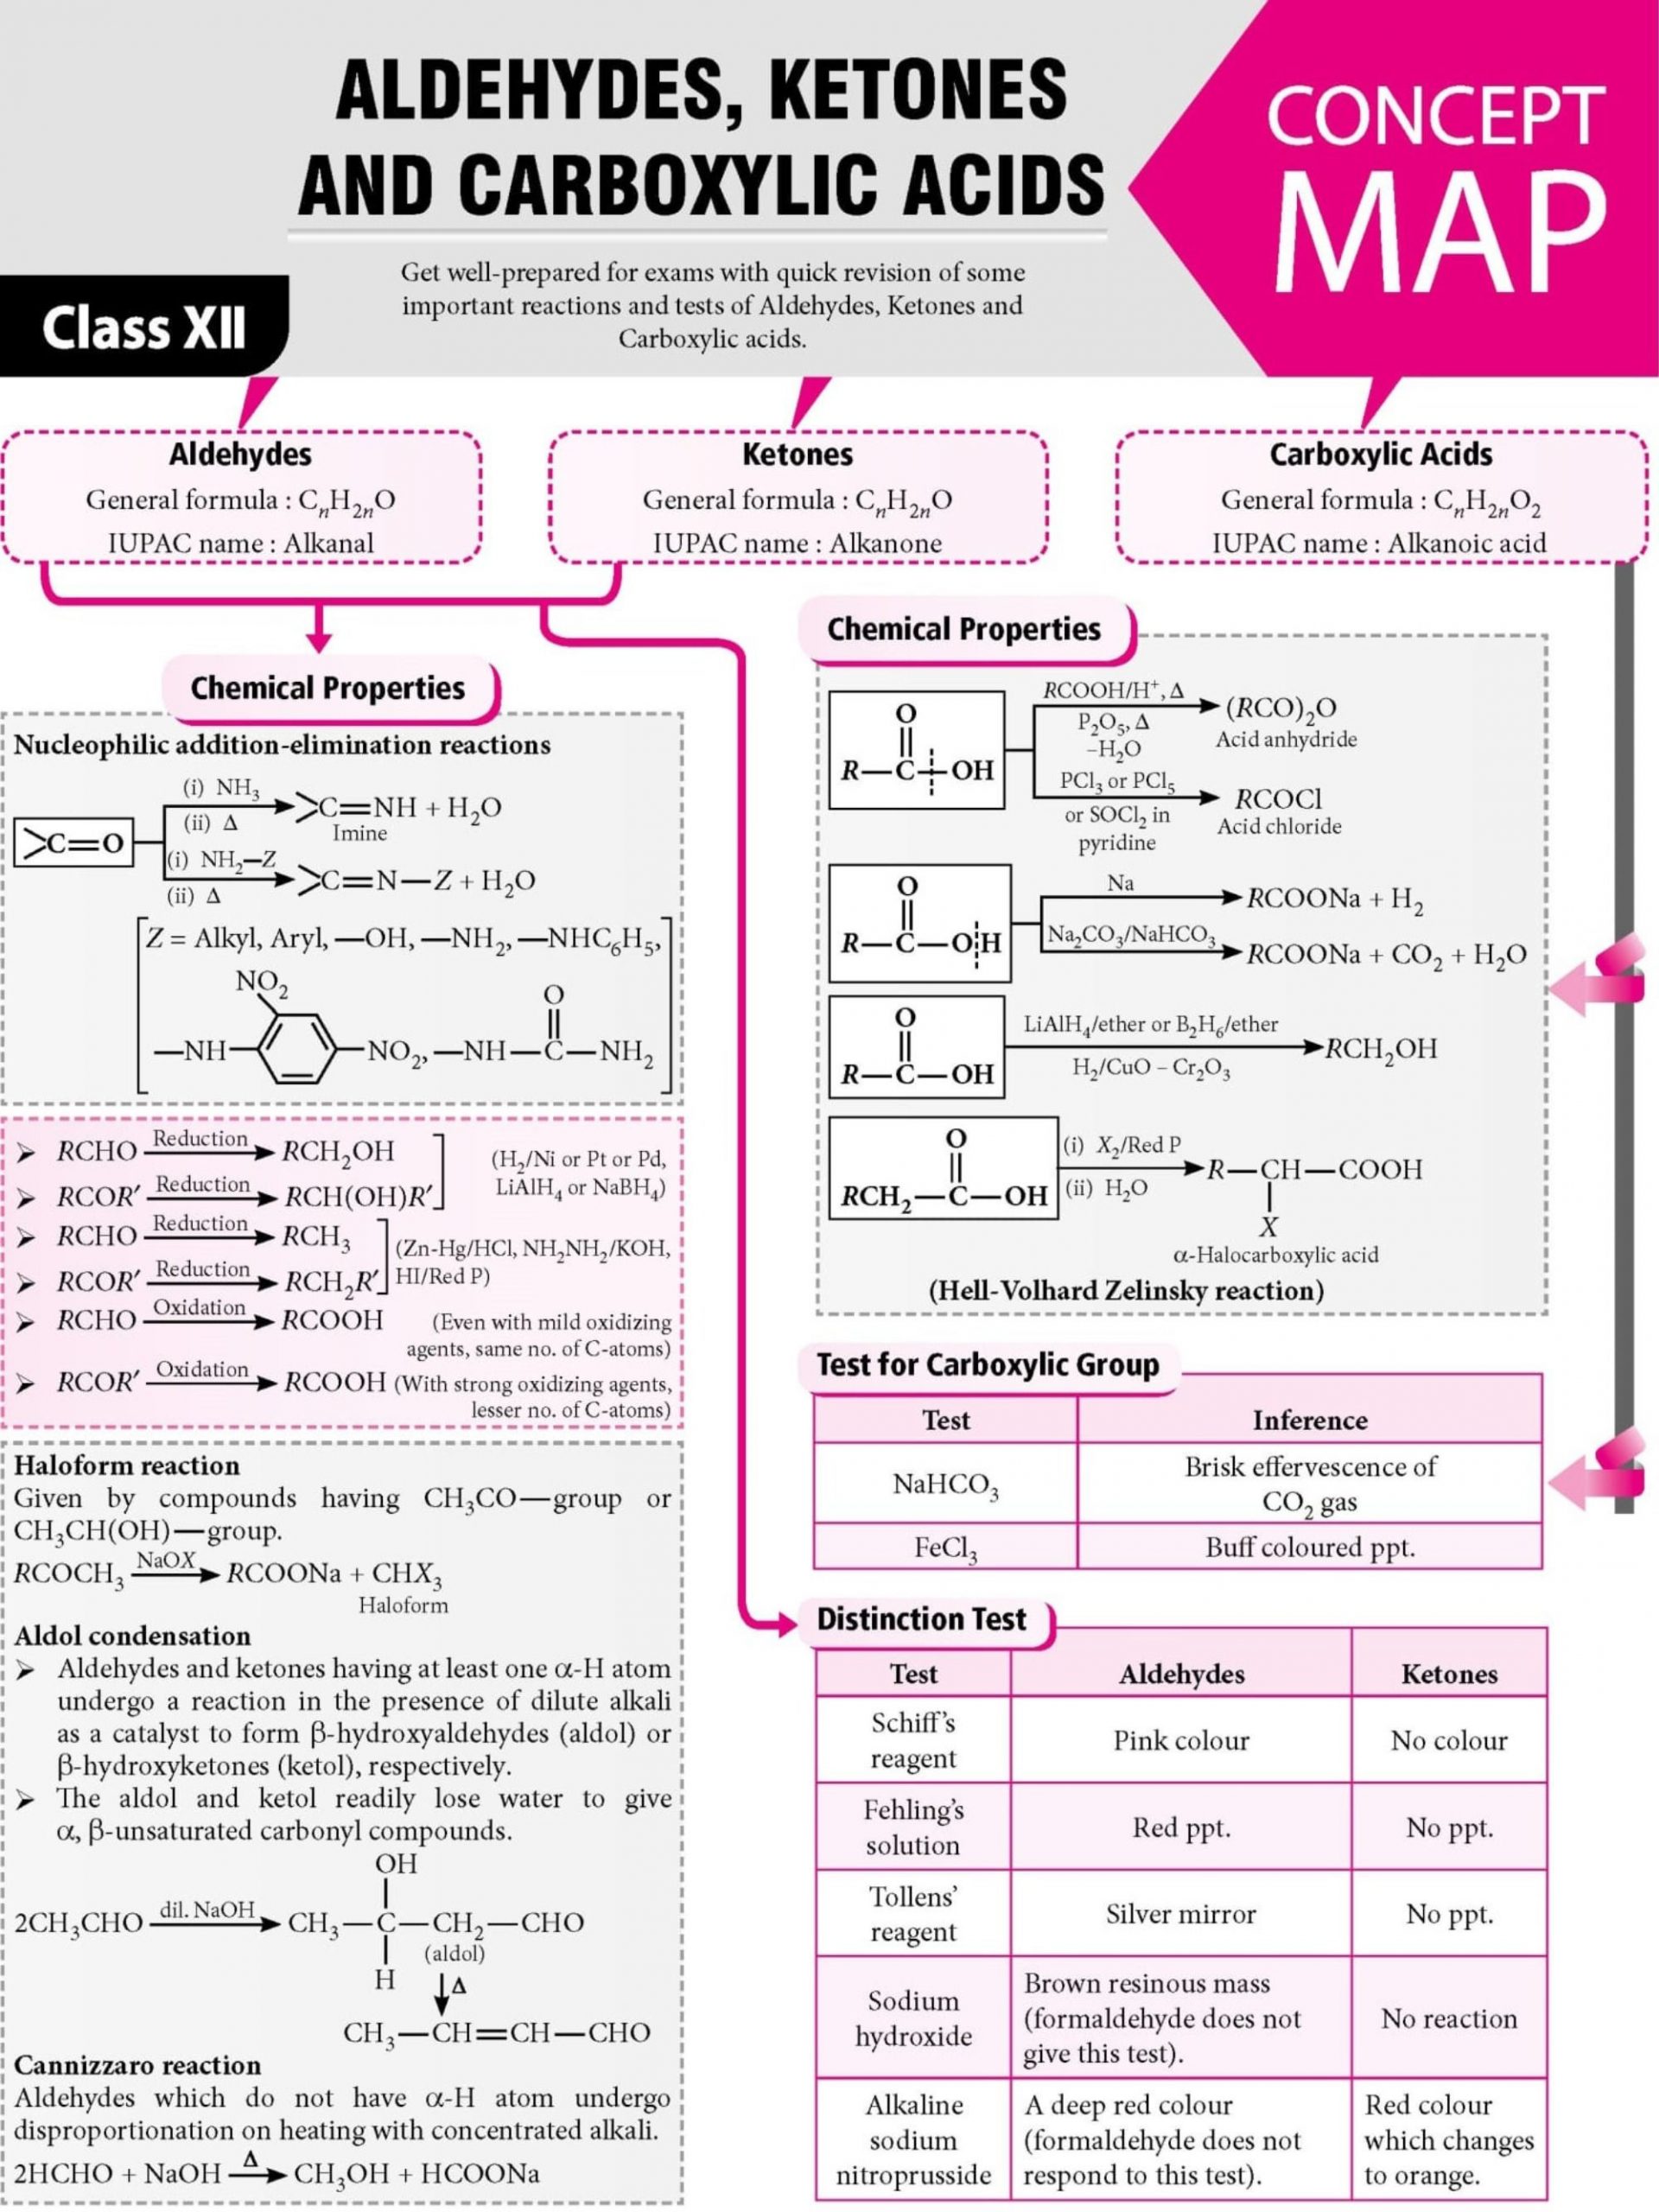 Skills Worksheet Concept Mapping Aldehydes Ketones and Carboxylic Acids Concept